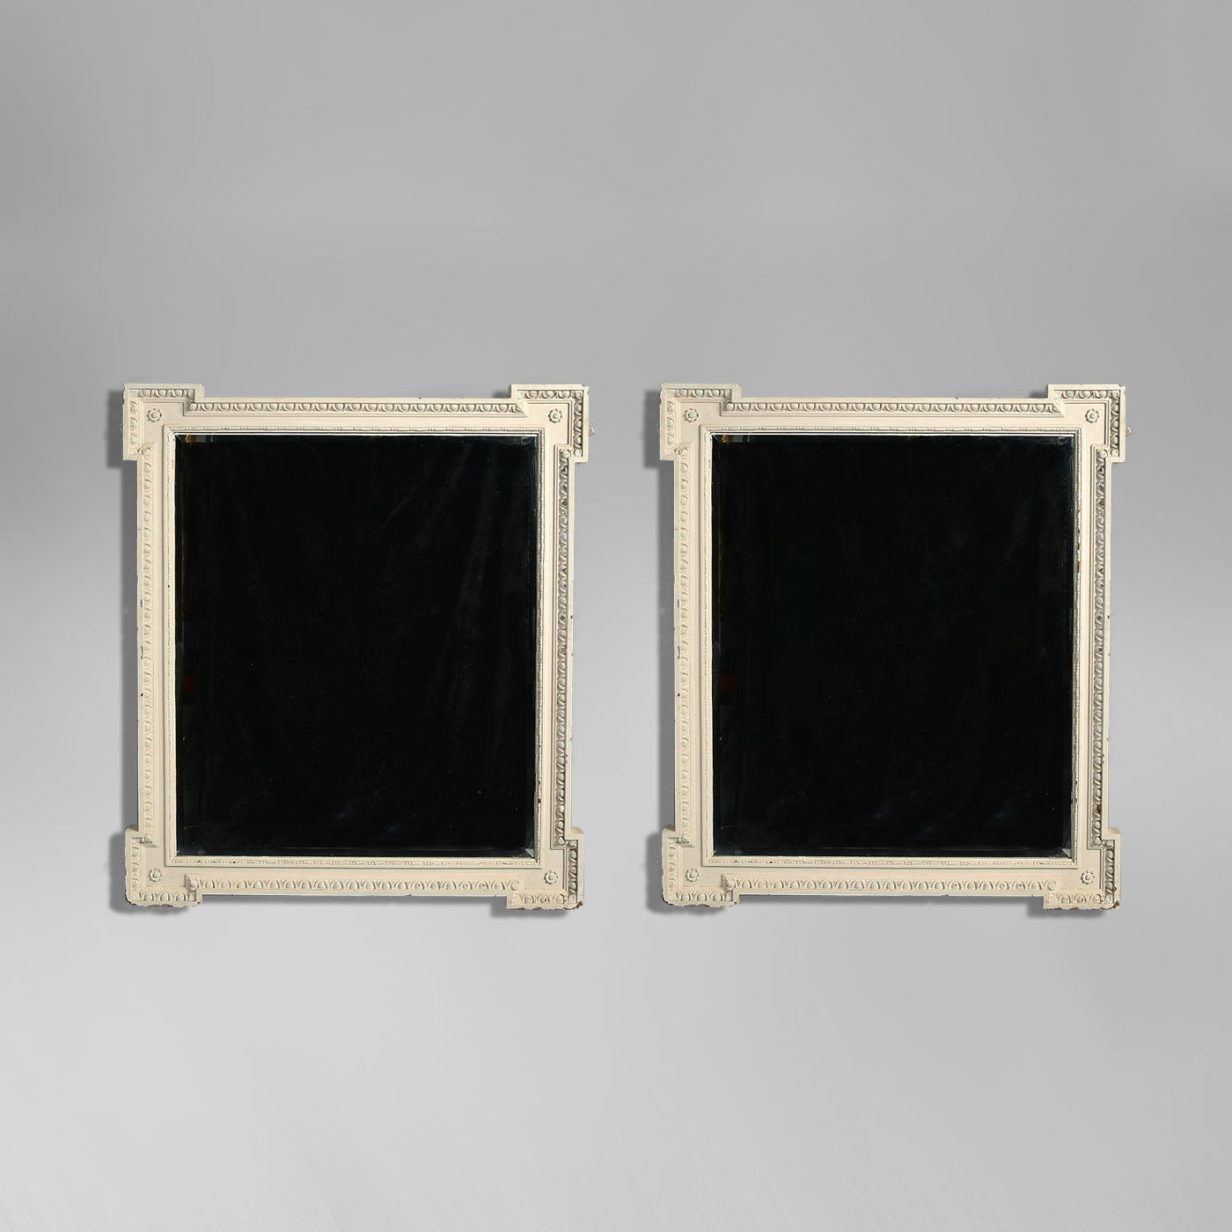 A large pair of william kent revival painted pier mirrors